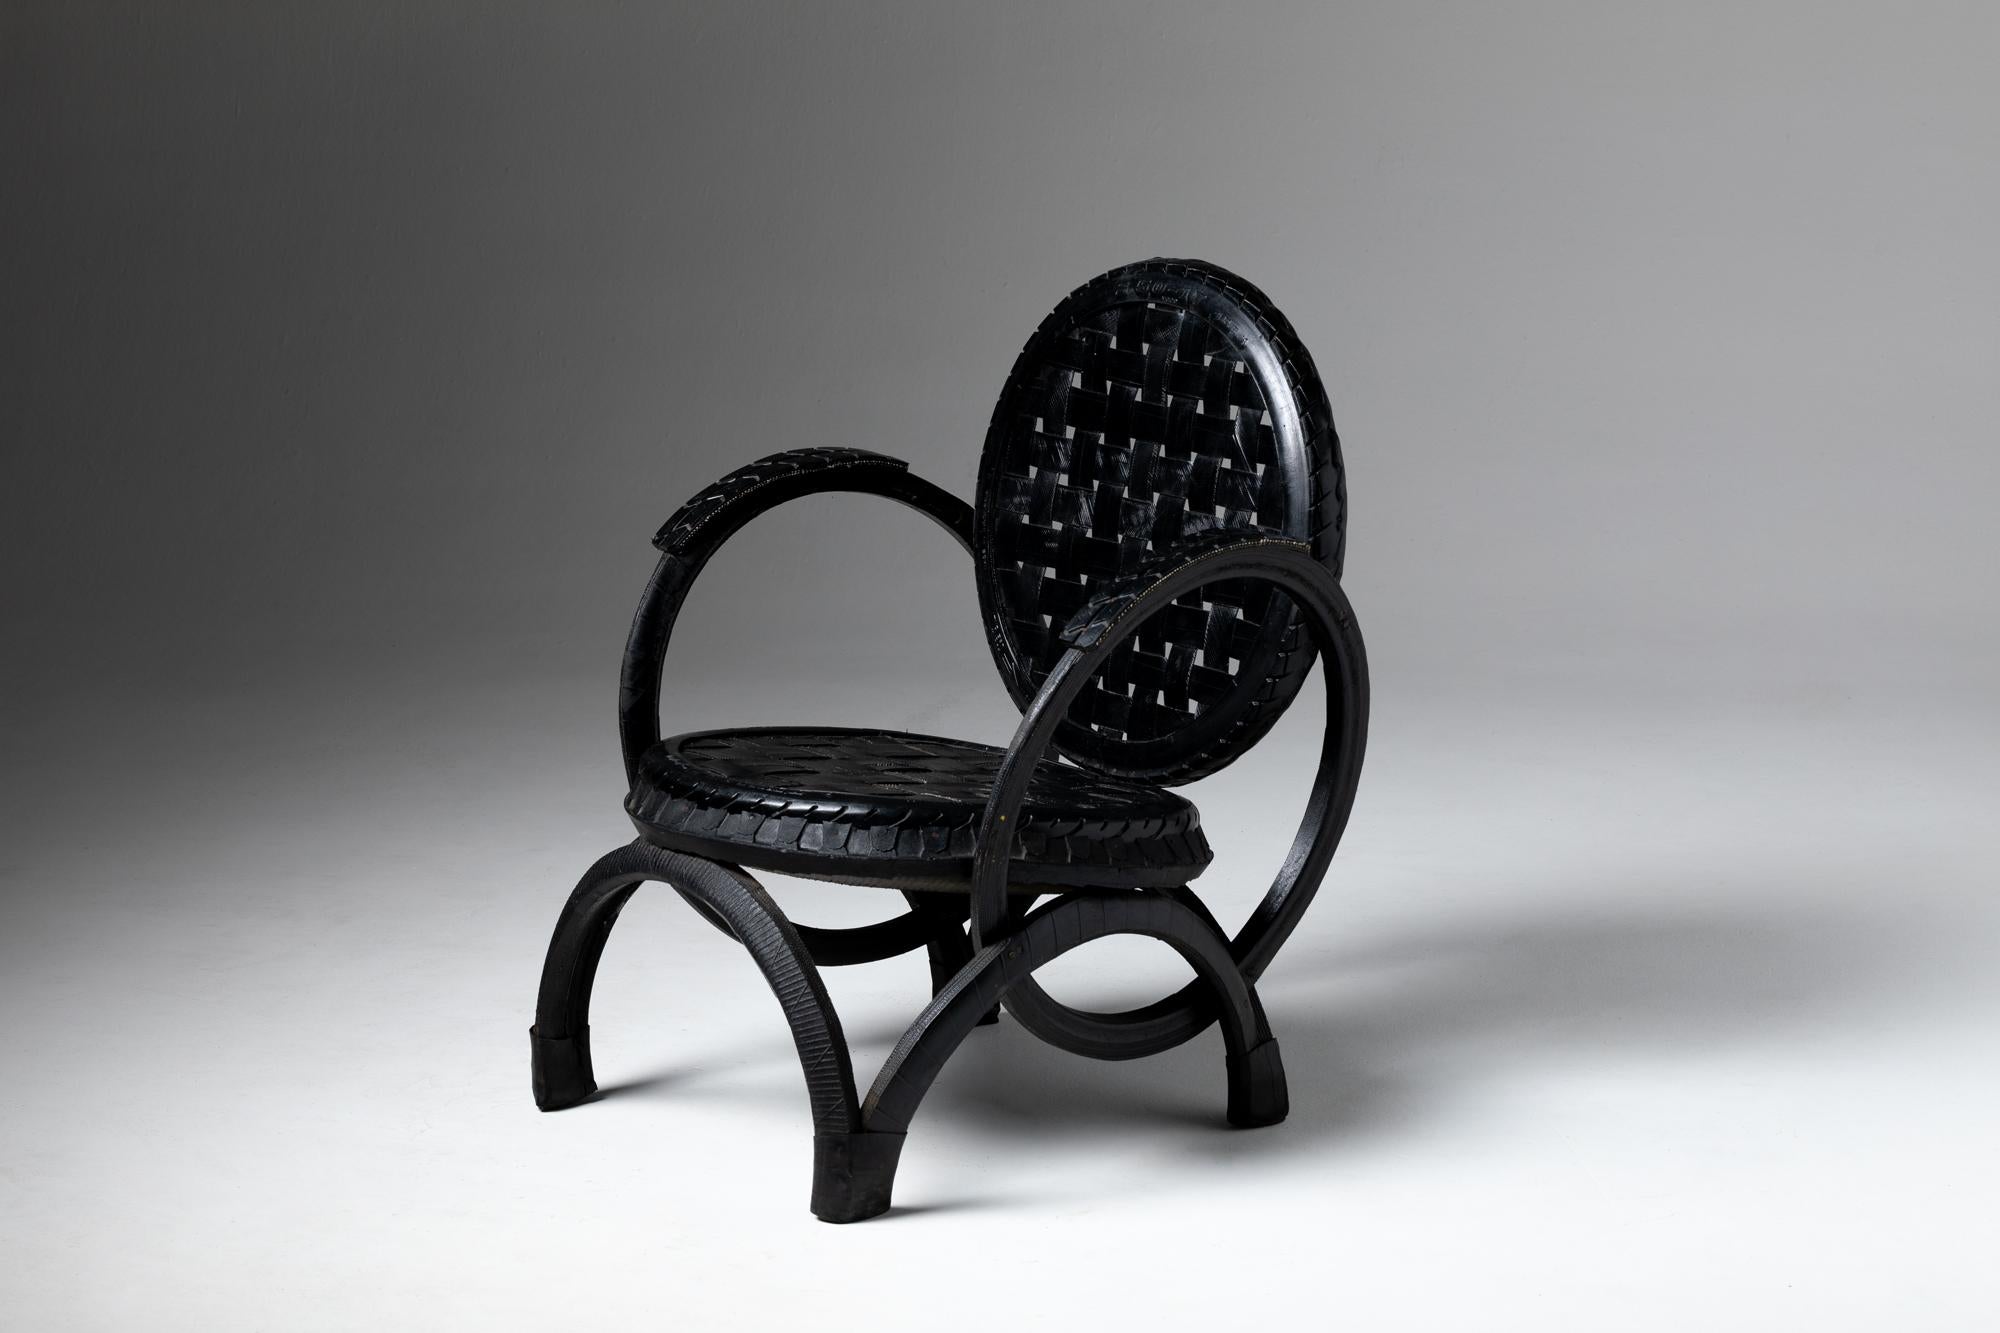 This special piece showcases the possibility of crafting a sitting chair with an complemental material - the use of vulcanized rubber used for road tire purposes.

Sustainability mindful due to the impact of the hard recycling at the time when the